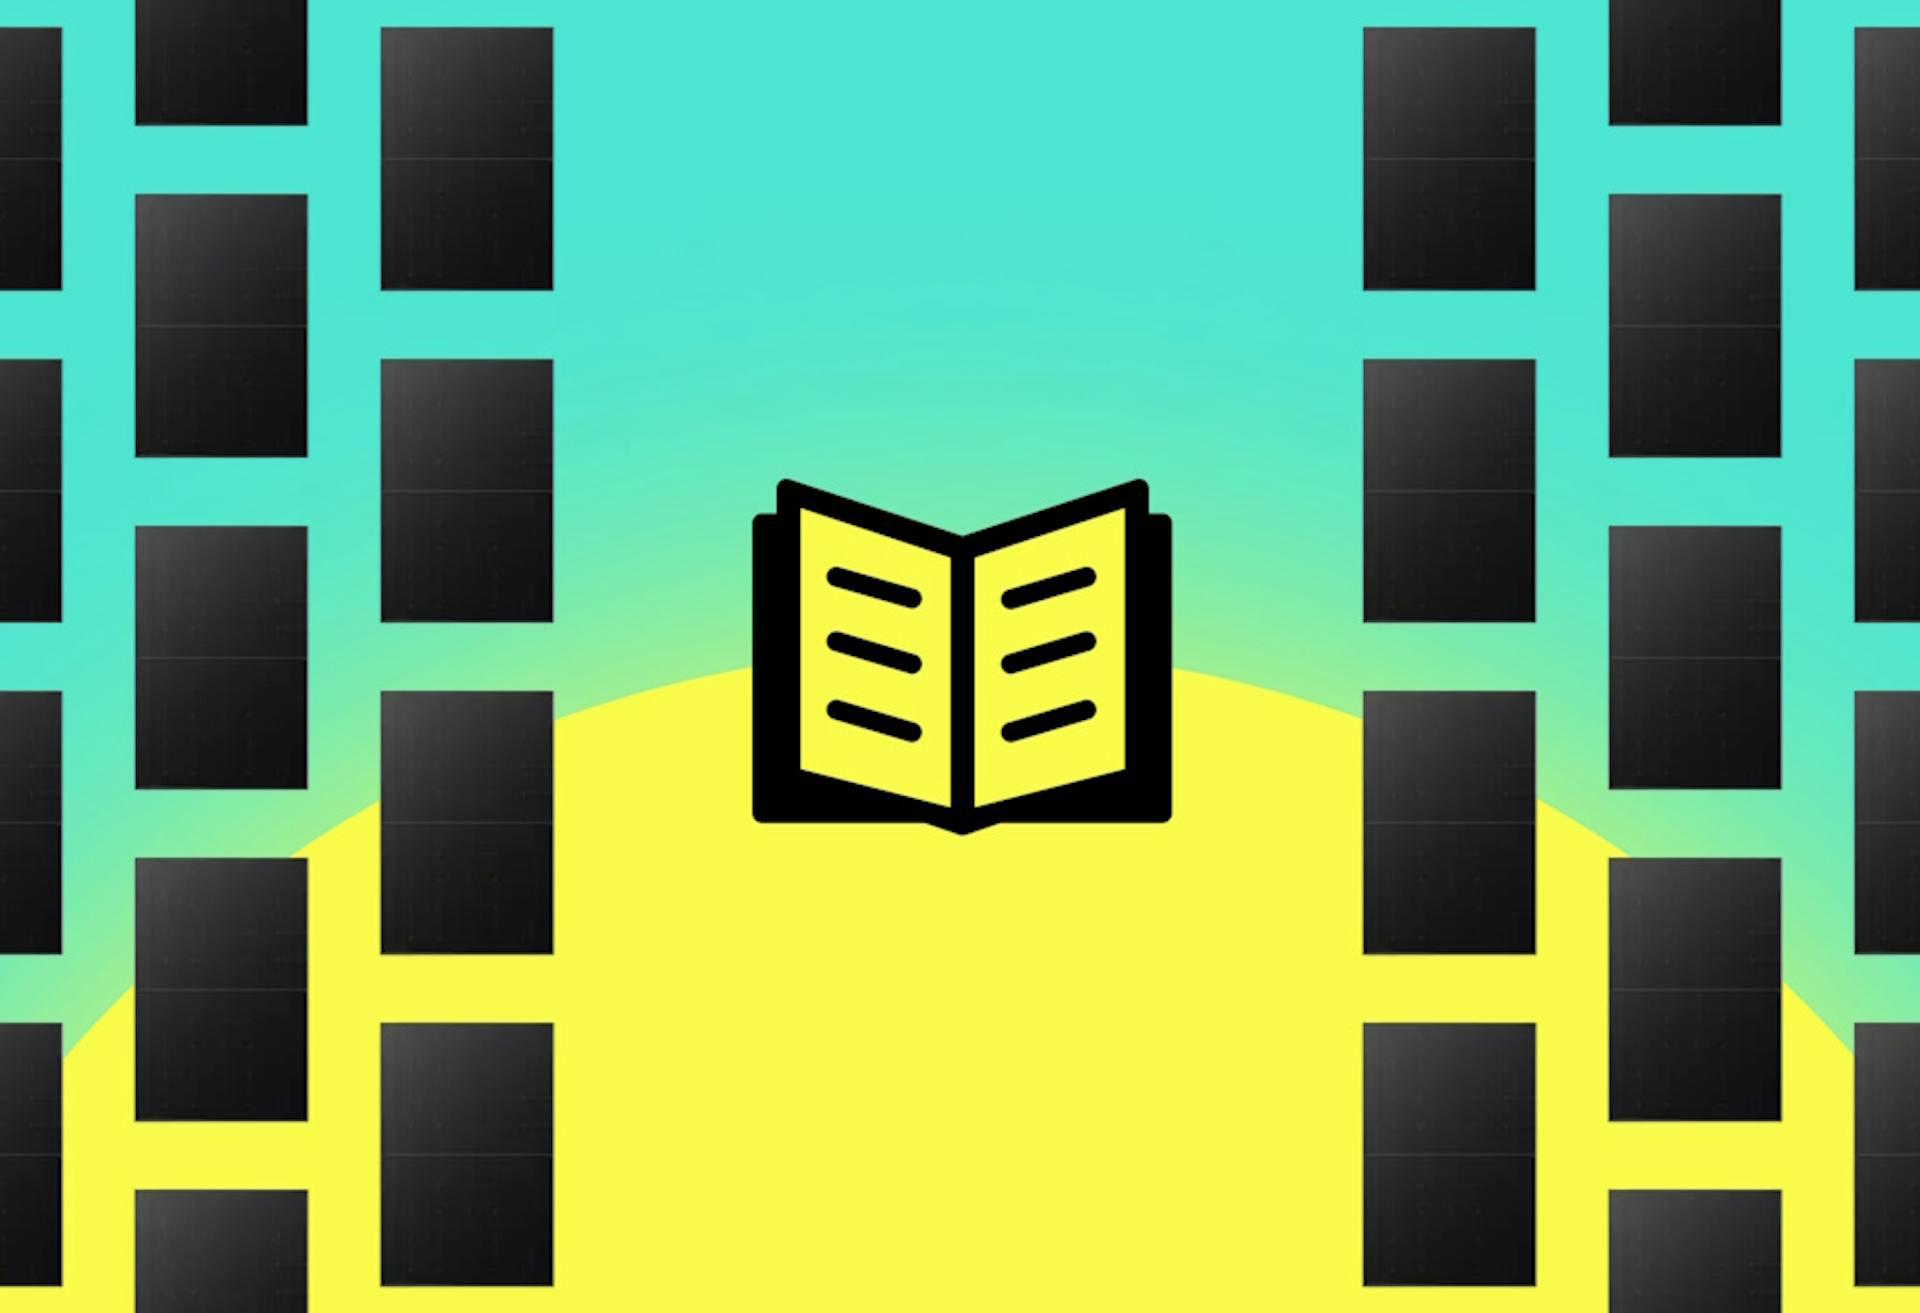 A graphic. In the centre is a yellow book outlined in black, with black rectangles down the sides in columns, against an aquamarine background with a yellow sun